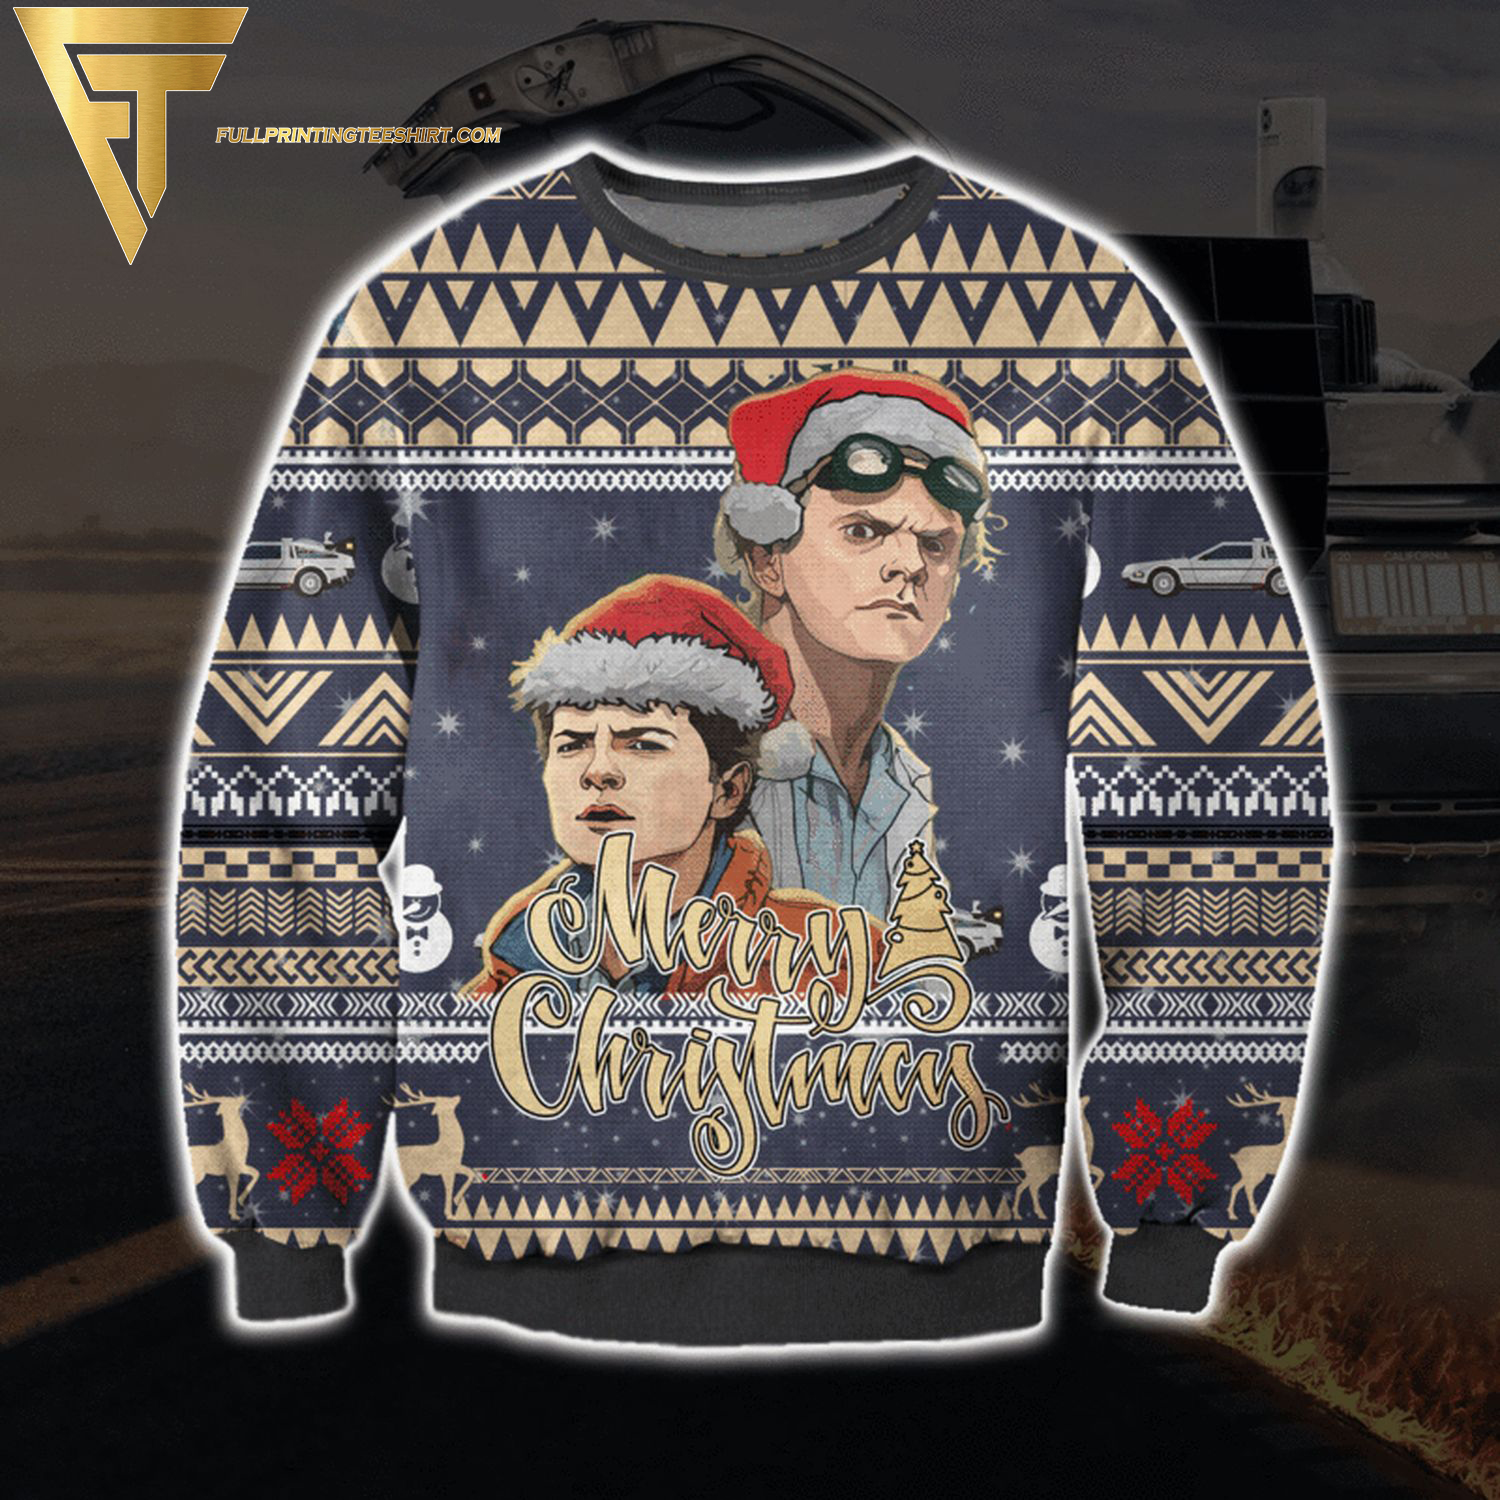 Back to the Future Merry Christmas Full Print Ugly Christmas Sweater